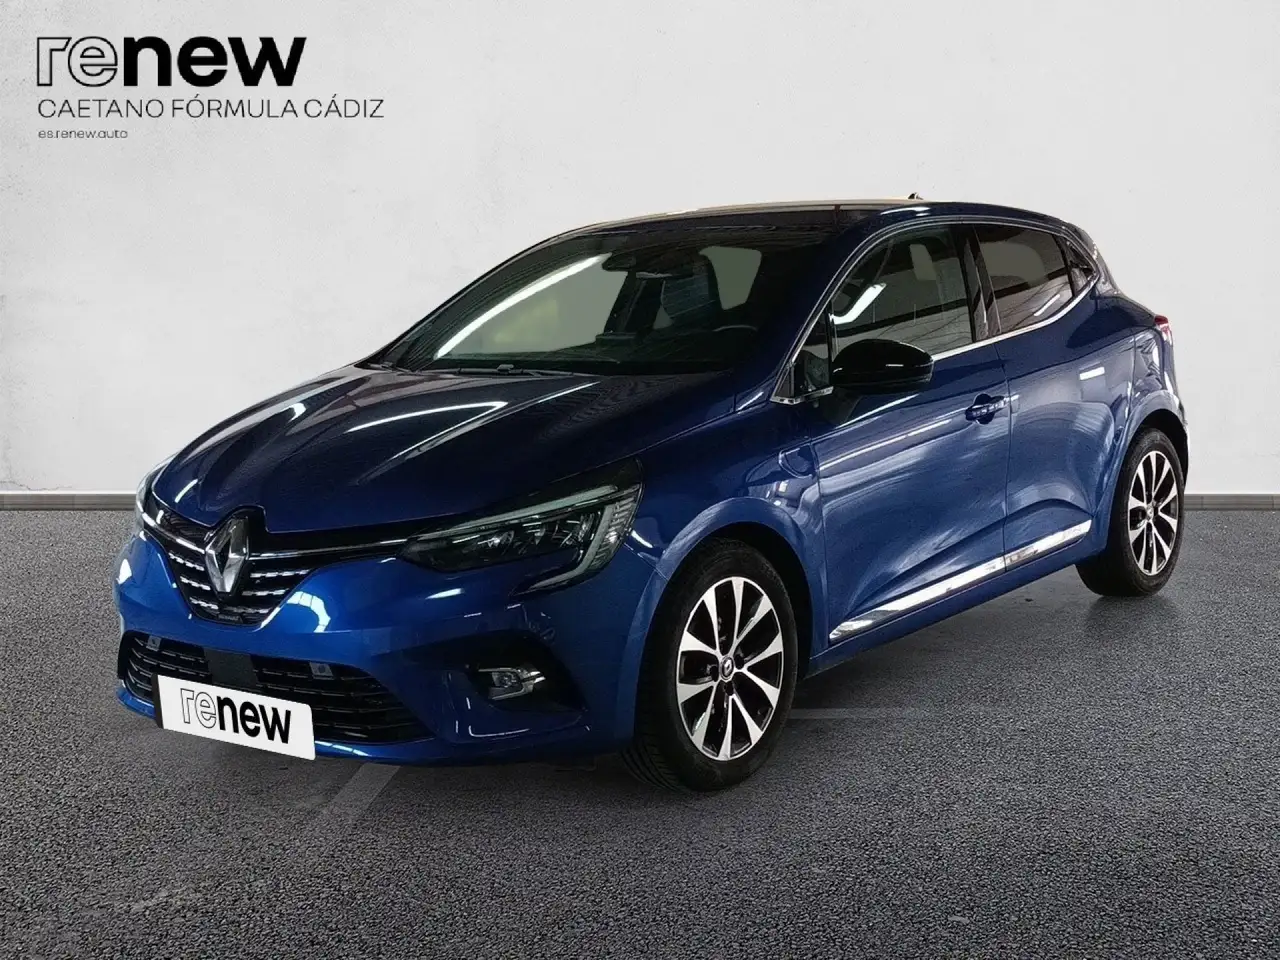  Renting renault clio tce techno 103kw azul 1